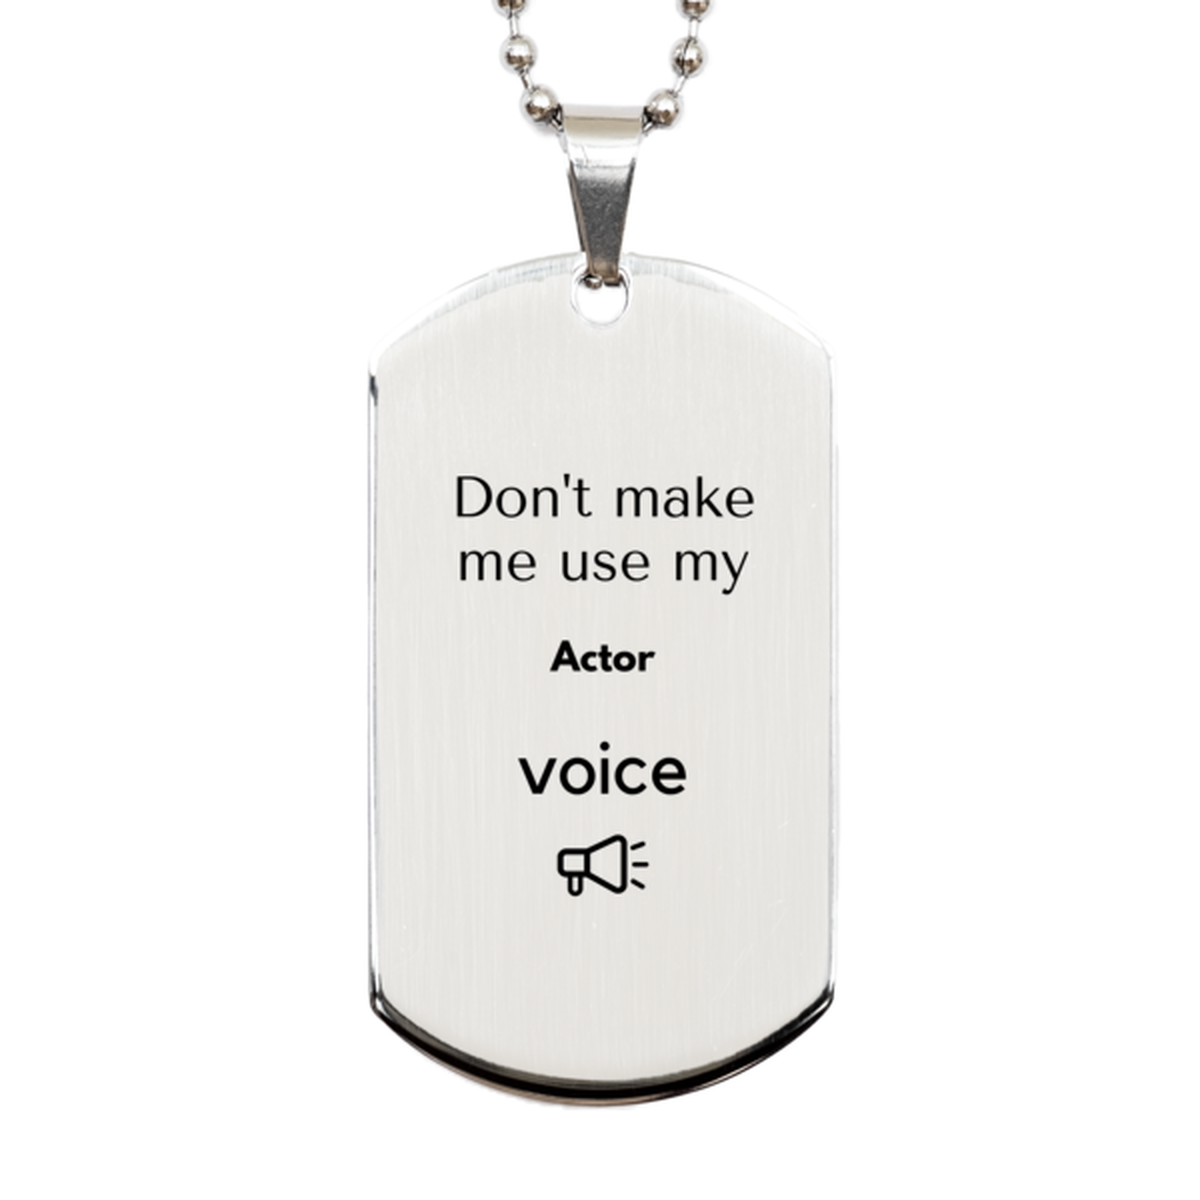 Don't make me use my Actor voice, Sarcasm Actor Gifts, Christmas Actor Silver Dog Tag Birthday Unique Gifts For Actor Coworkers, Men, Women, Colleague, Friends